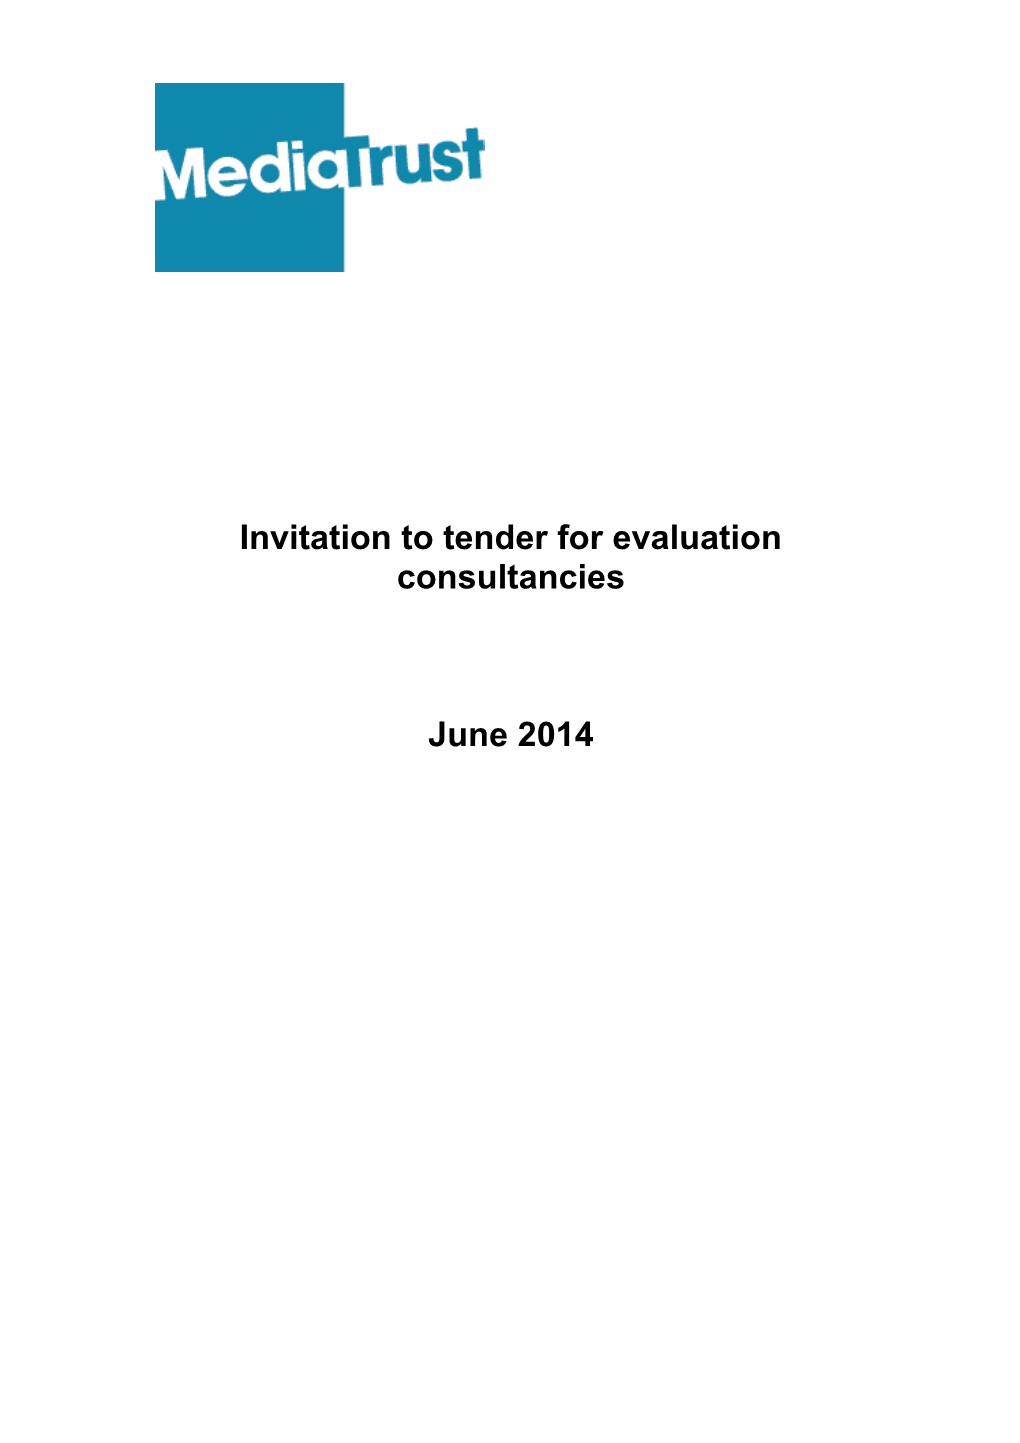 Invitation to Tender for Evaluation Consultancies